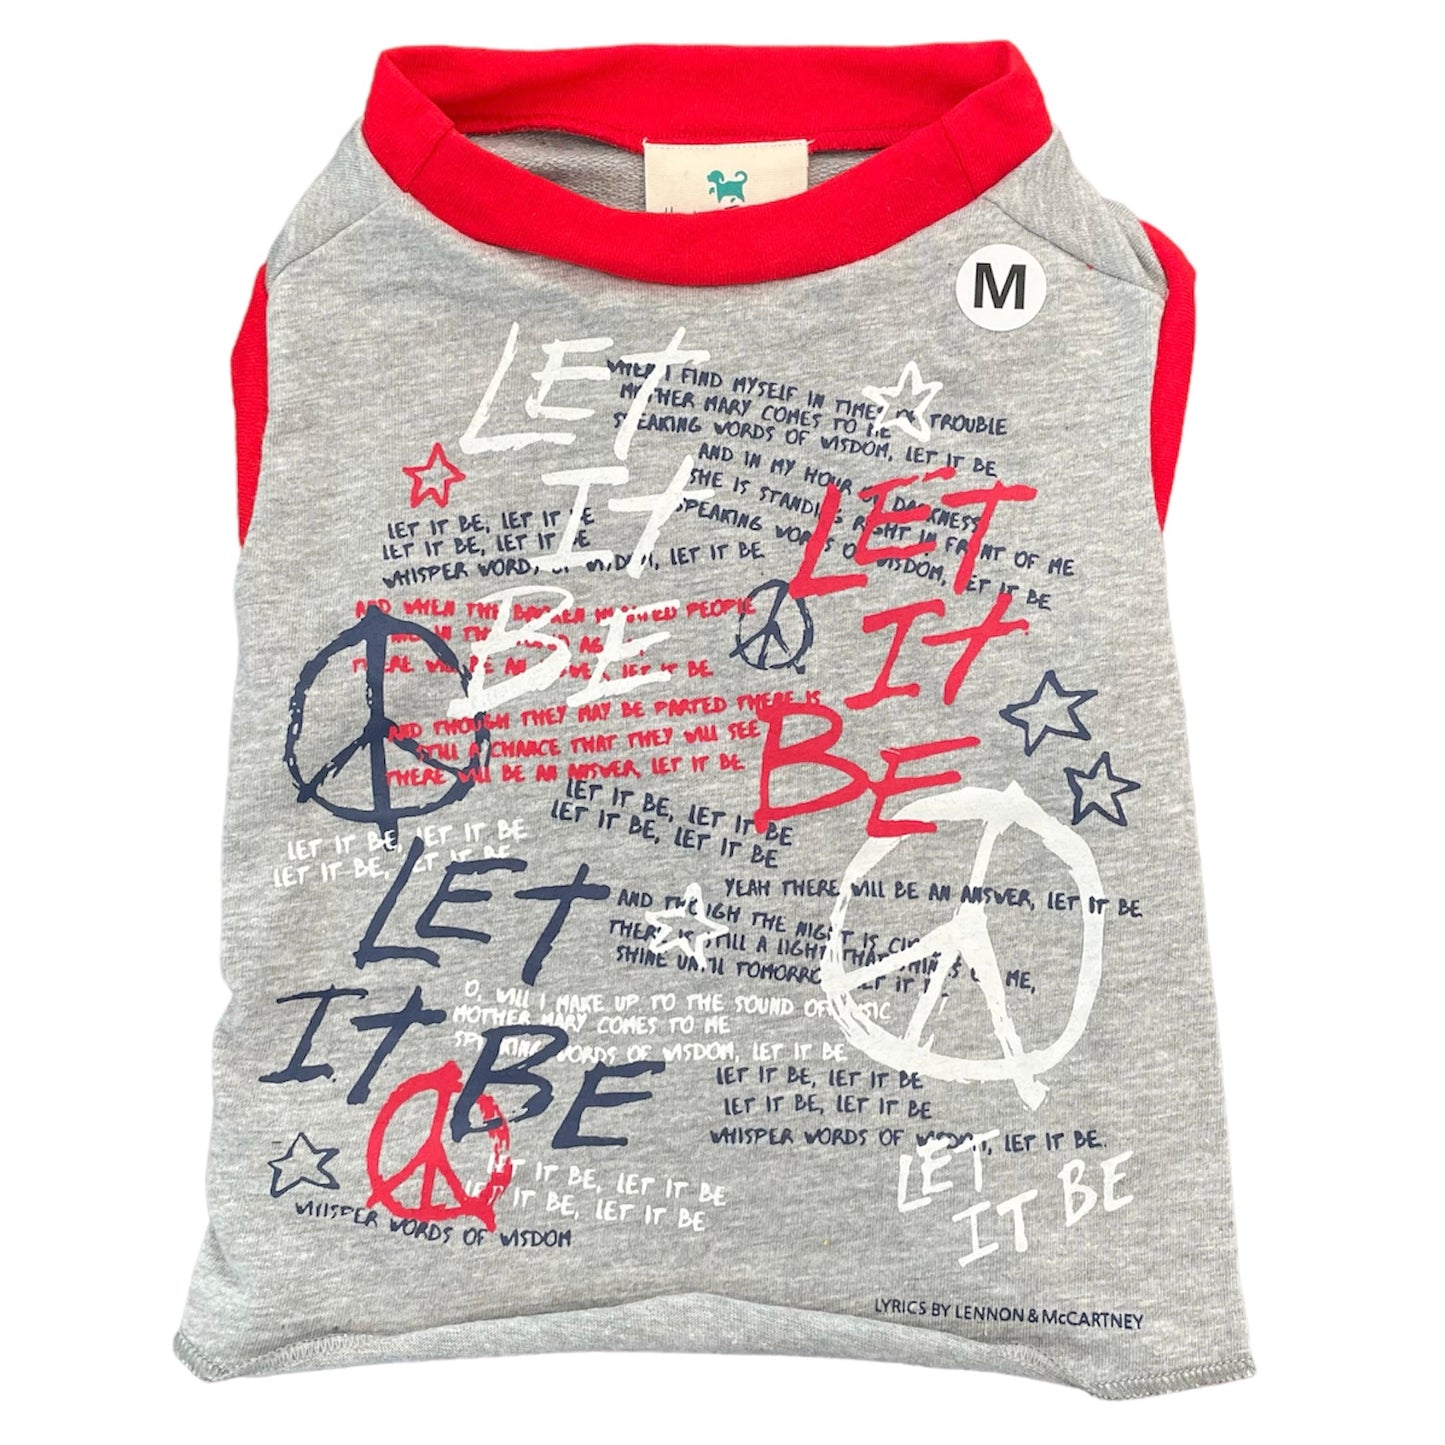 Upcycled Dog Tank - M “LET IT BE”